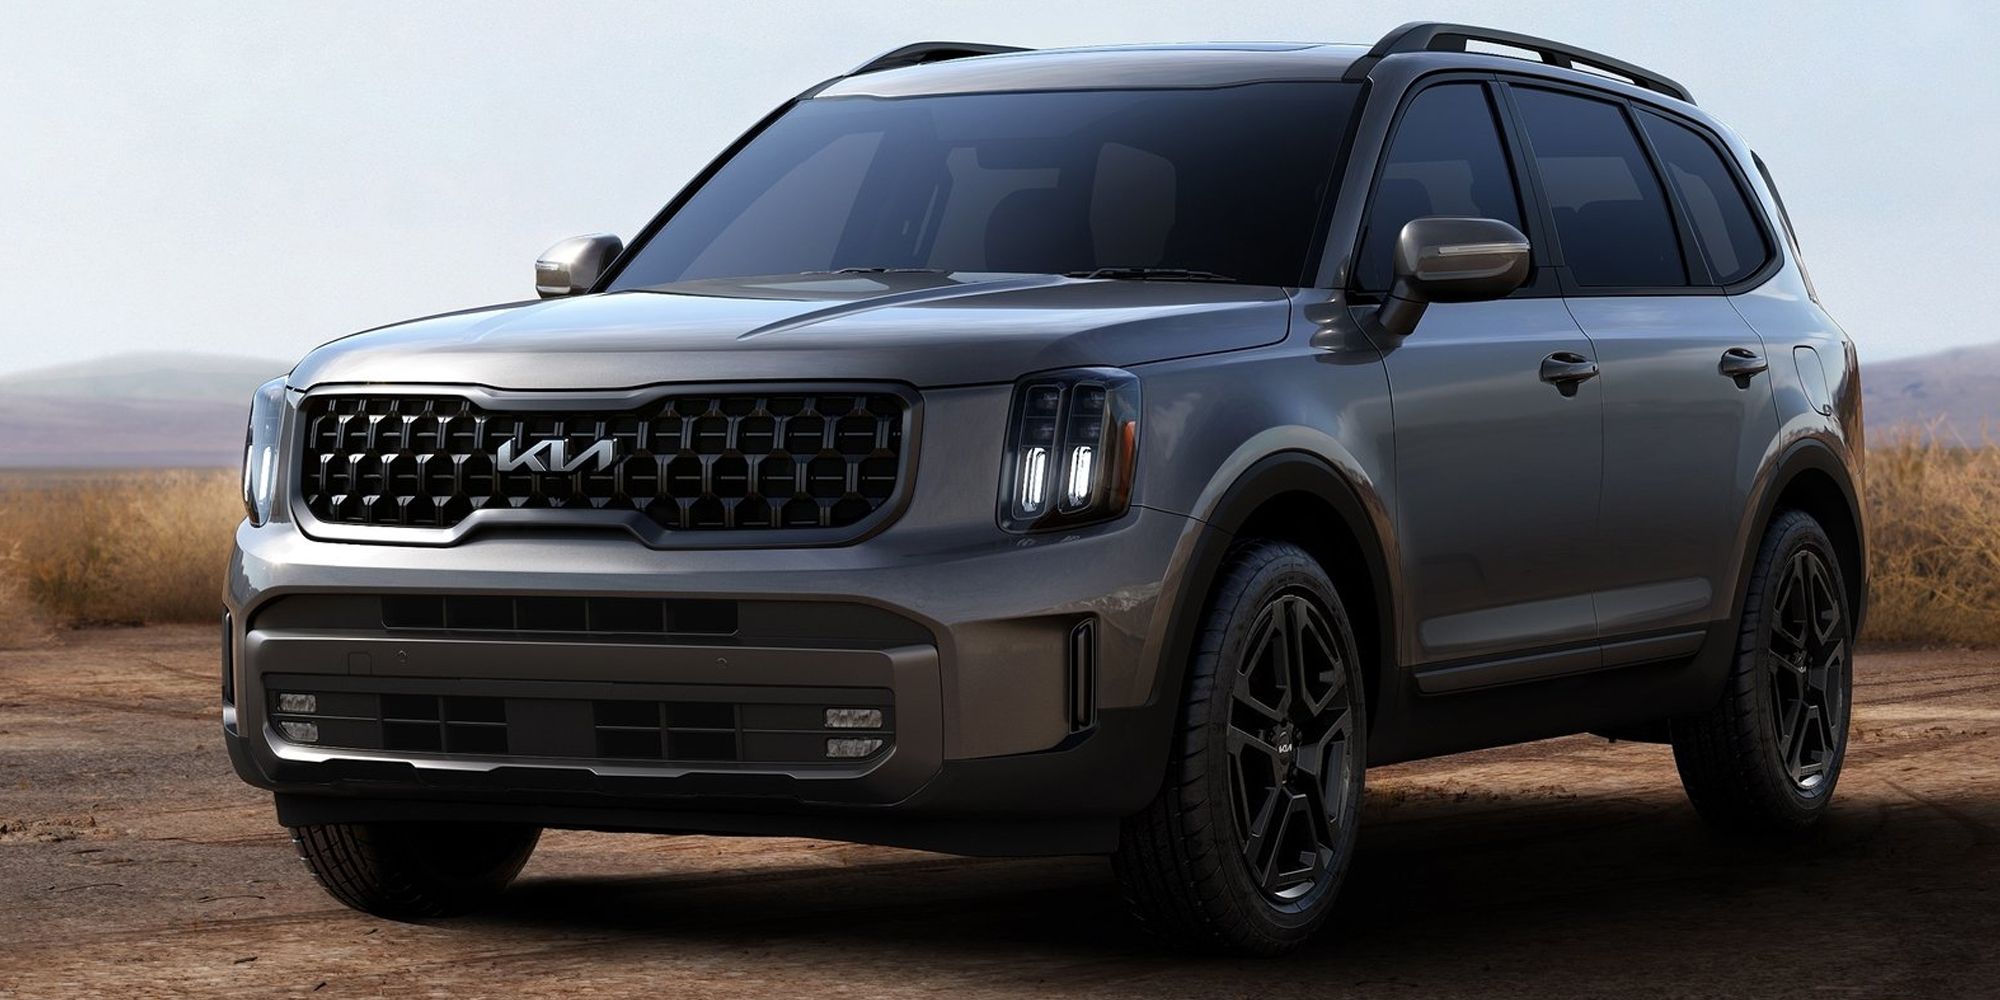 A Guide To Buying The 2023 Kia Telluride